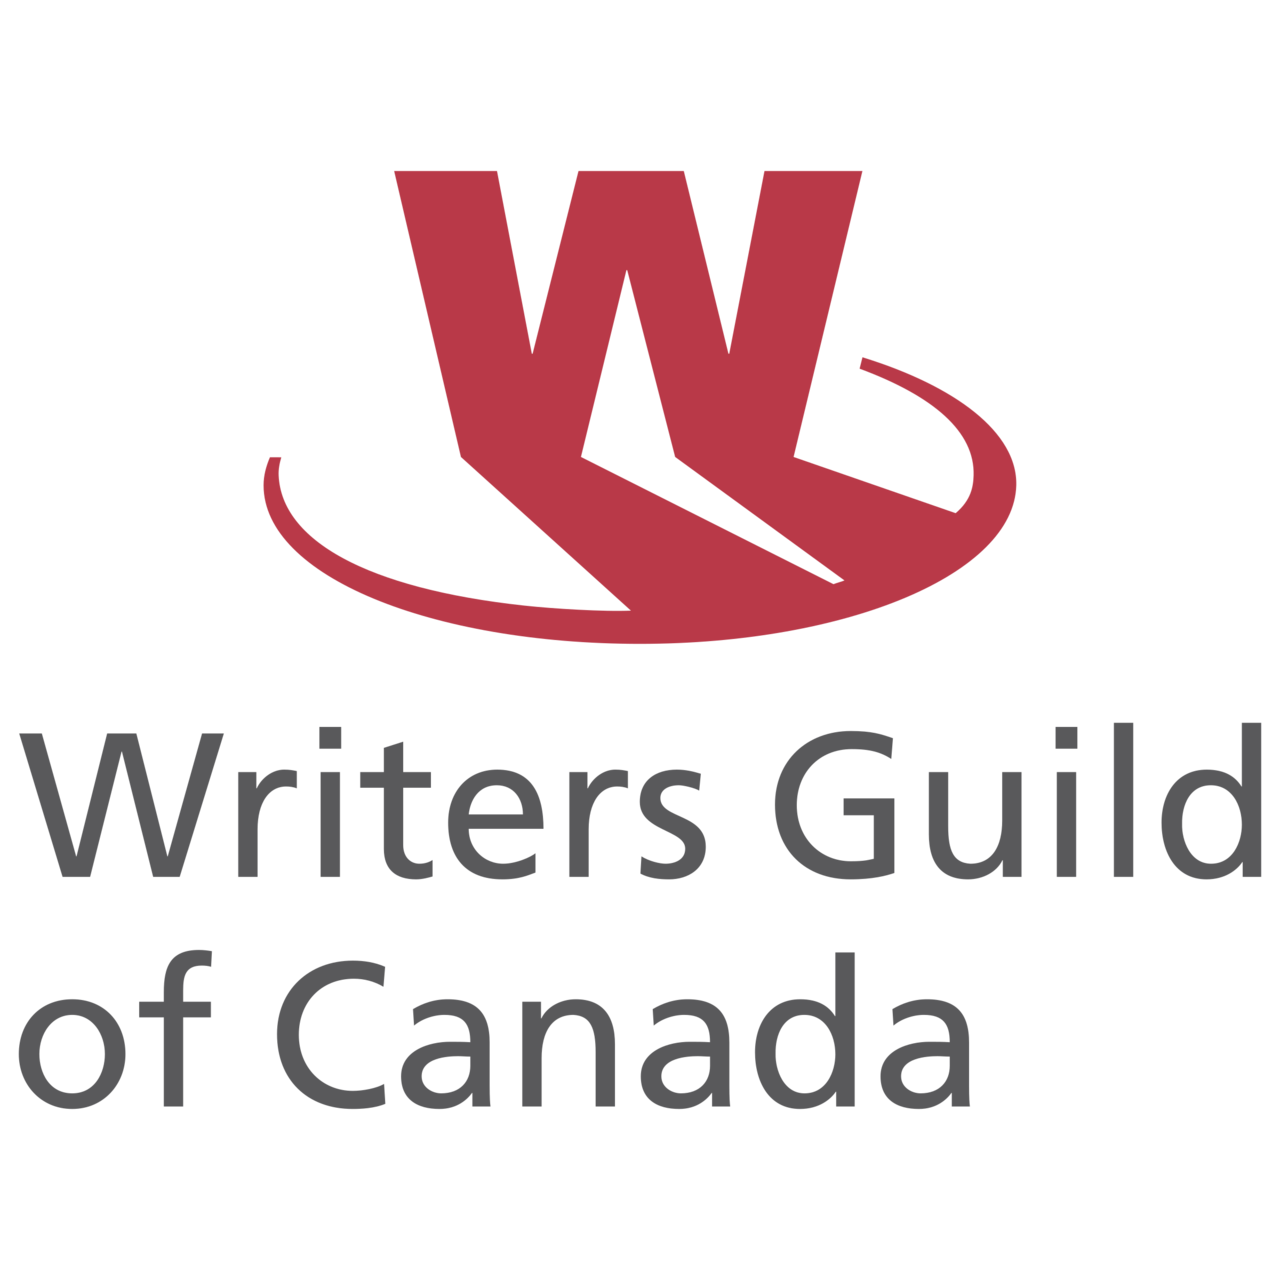 The Writers Guild of Canada